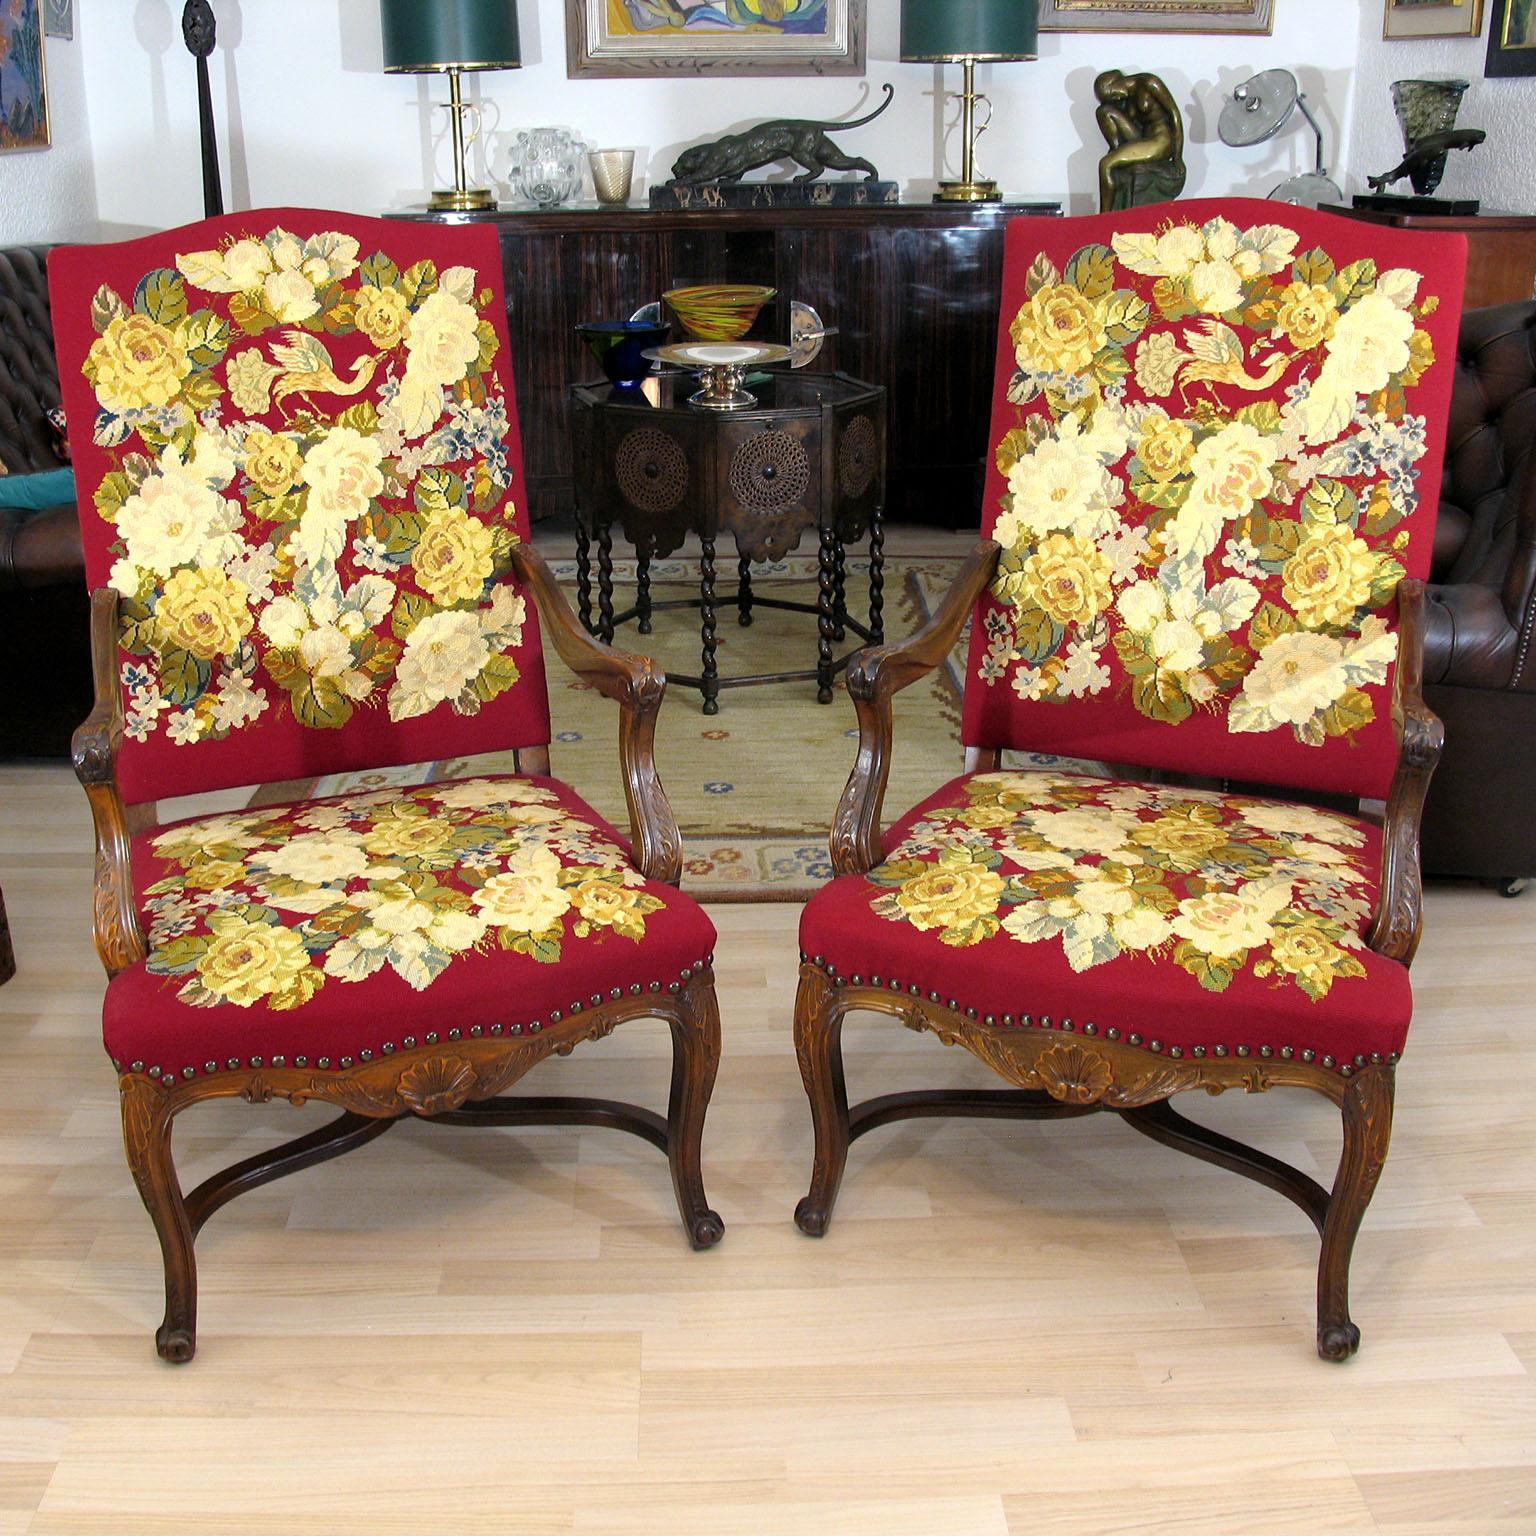 Baroque pair of armchairs with gorgeous embroidered upholstery.
Exceptional early 20th century pair of armchairs in stained beech and needlepoint upholstery, realized in the late Baroque style.
The upholstery is impeccable worked, realized in